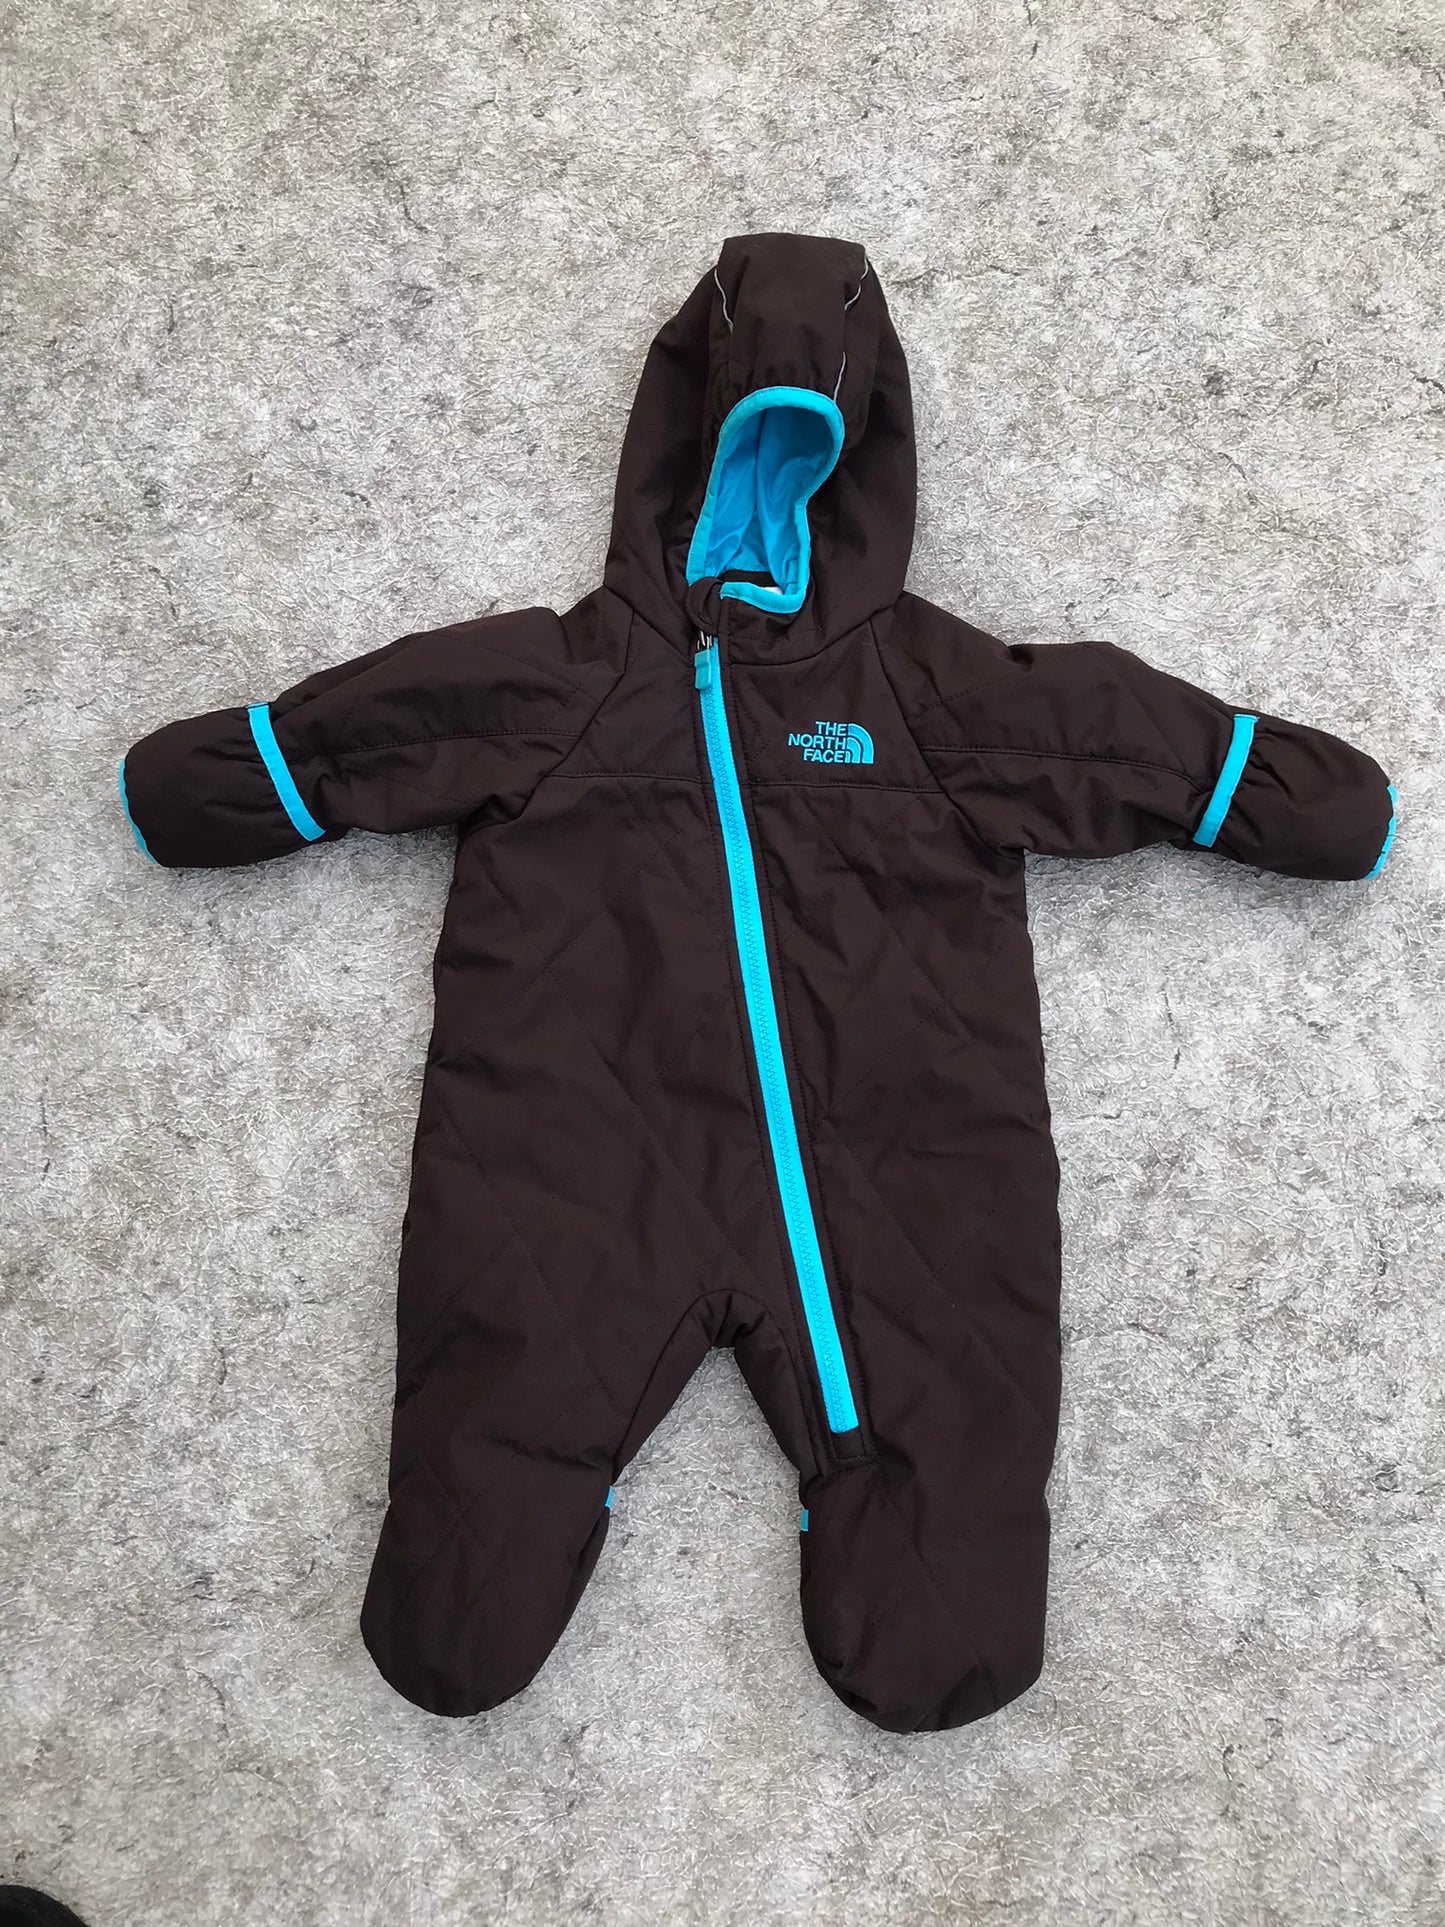 Snowsuit Child Size 3-6 Infant Baby The North Face Brown Blue Hand Mitts Open or Covered